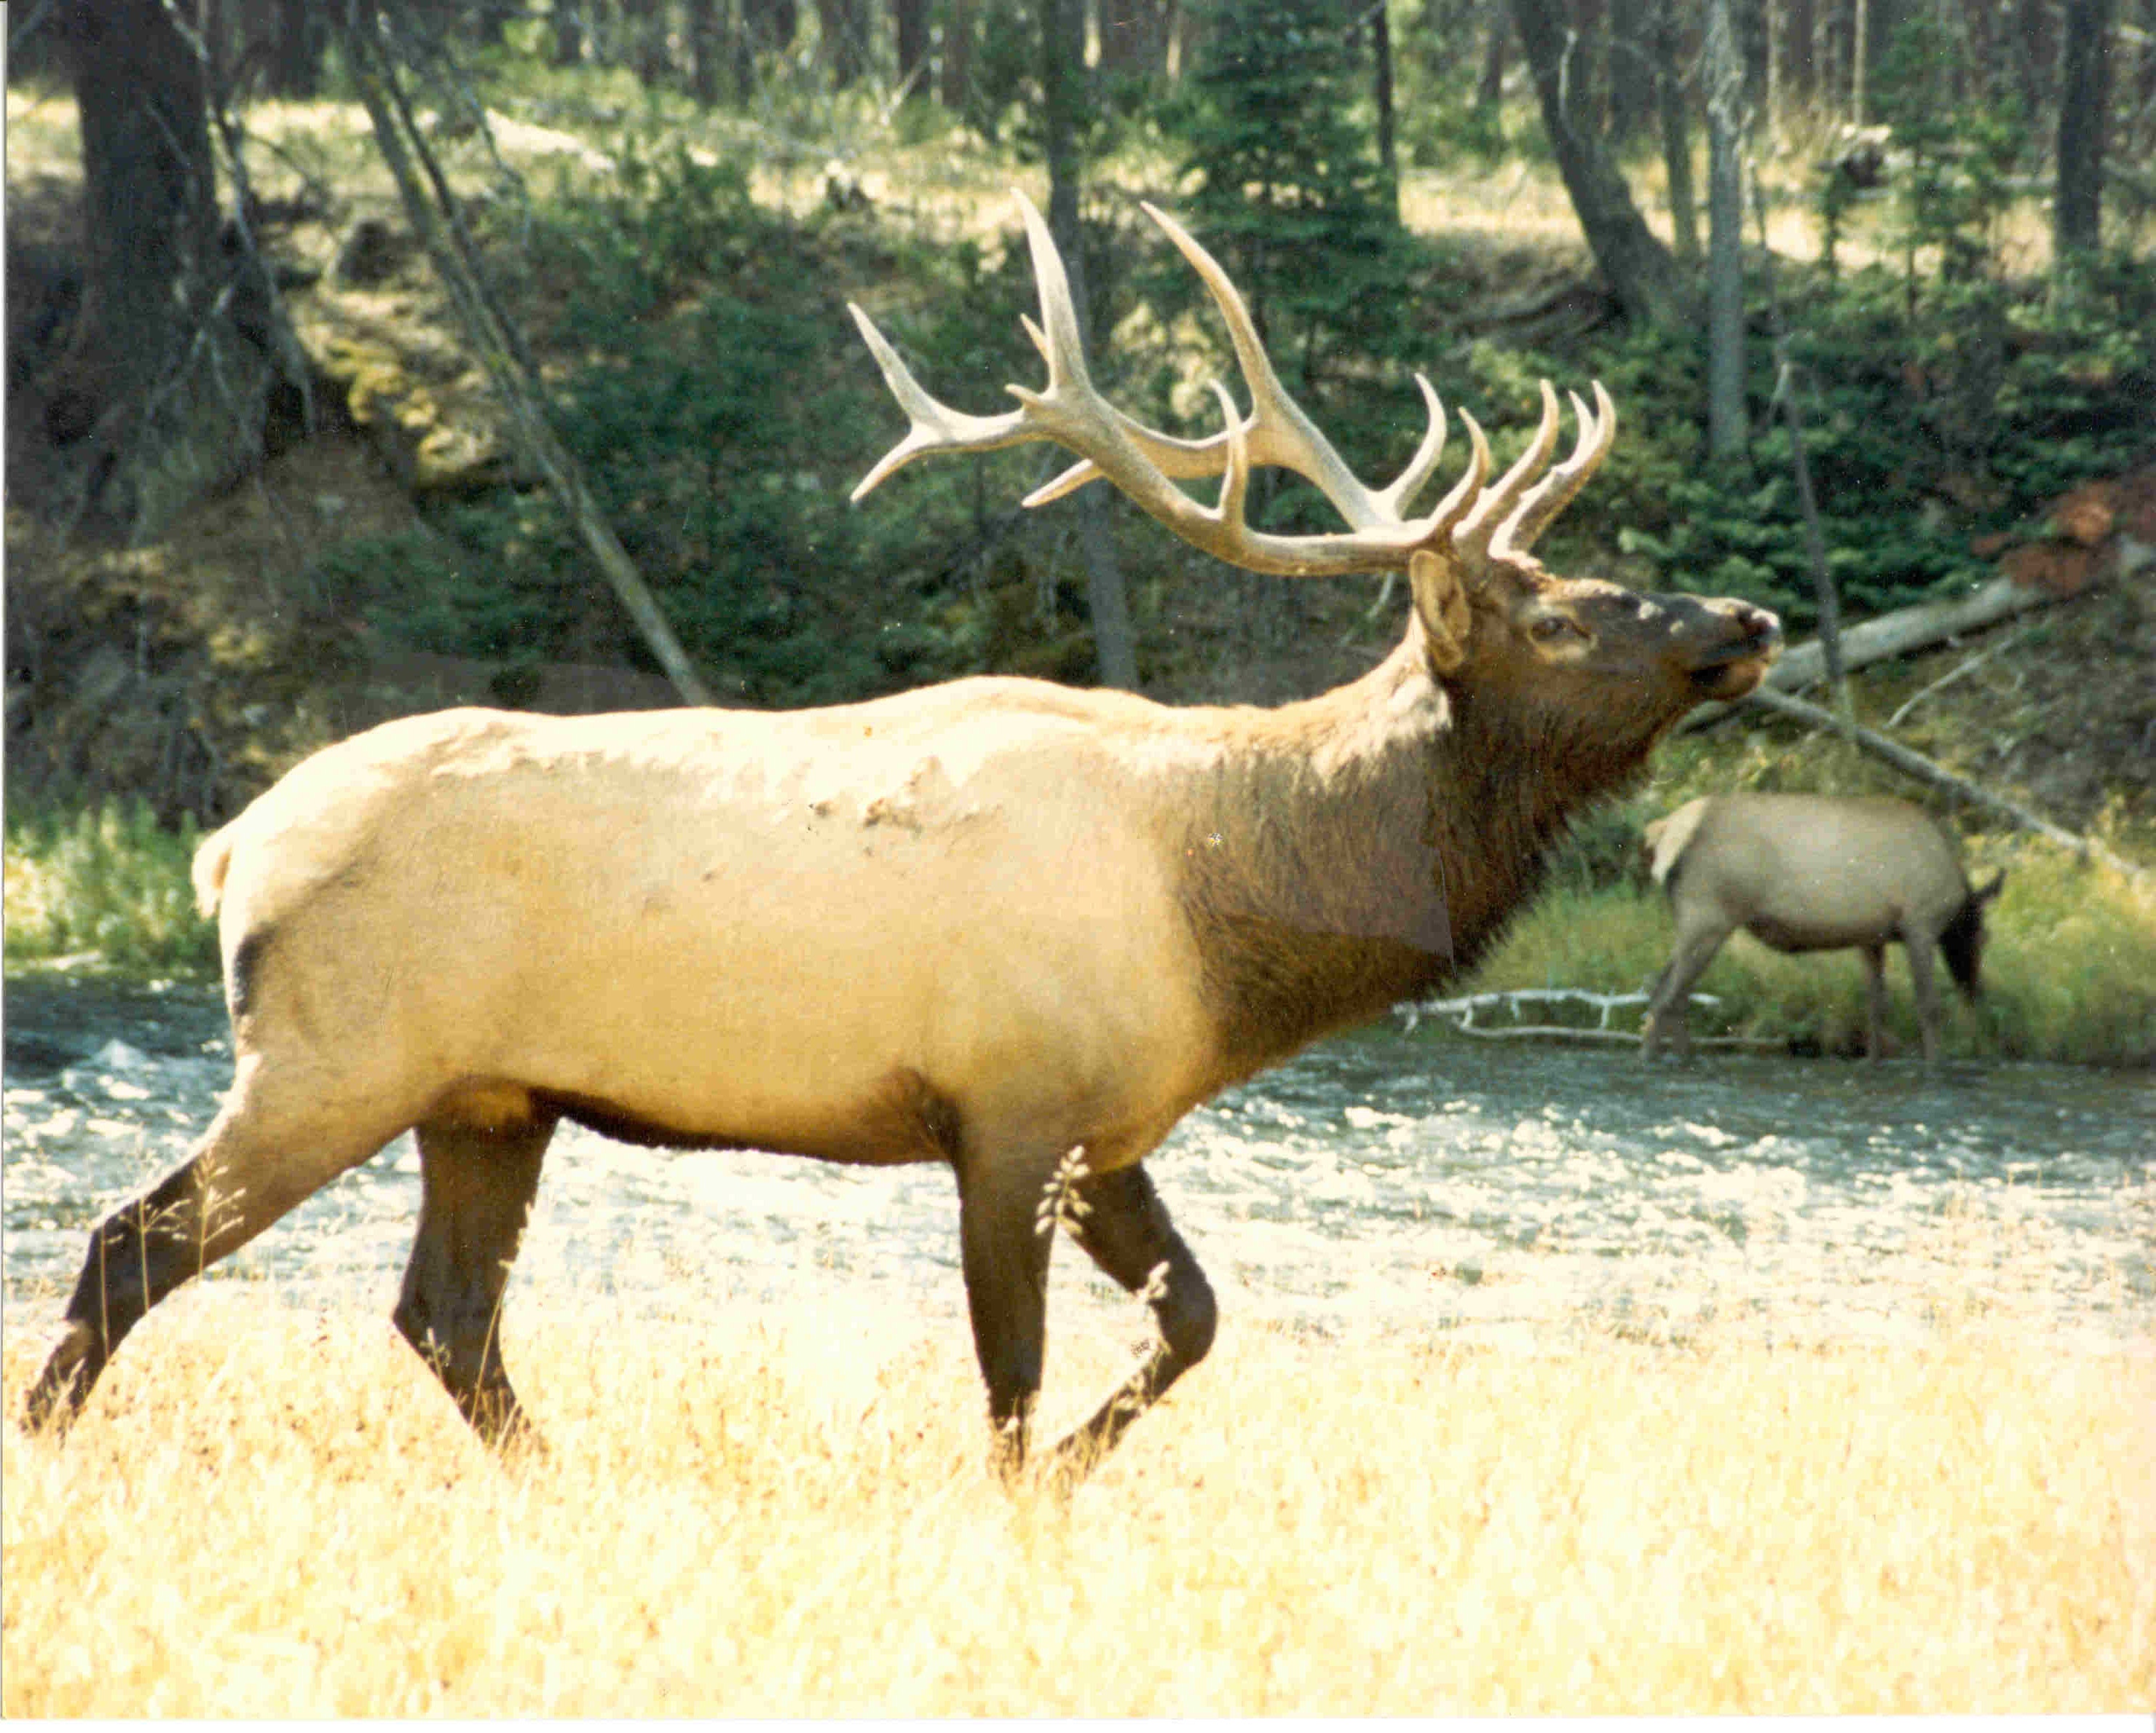 Bull Elk Photo my Father took with his Olympus 35mm Camera